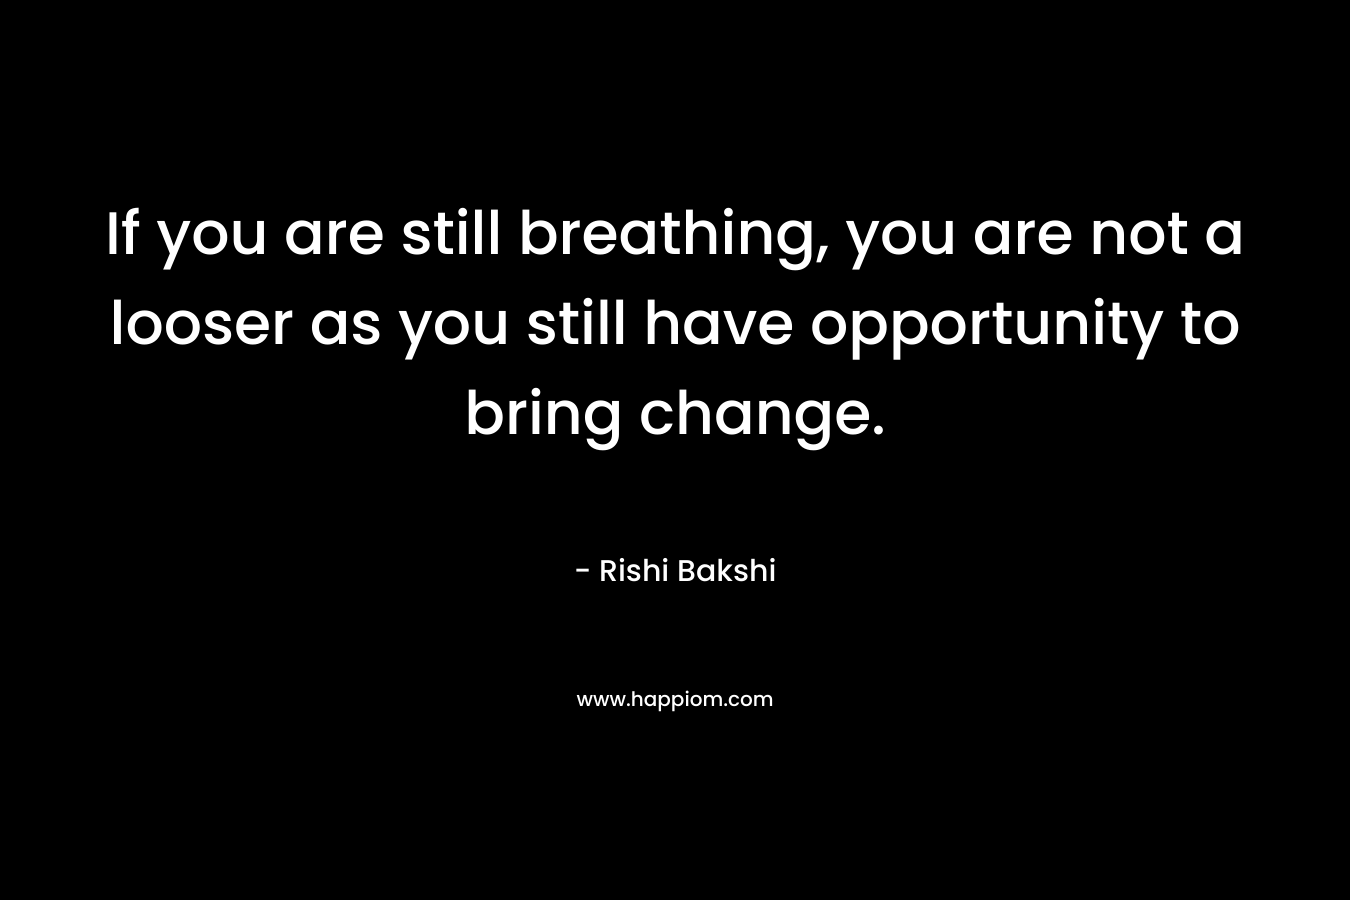 If you are still breathing, you are not a looser as you still have opportunity to bring change. – Rishi Bakshi